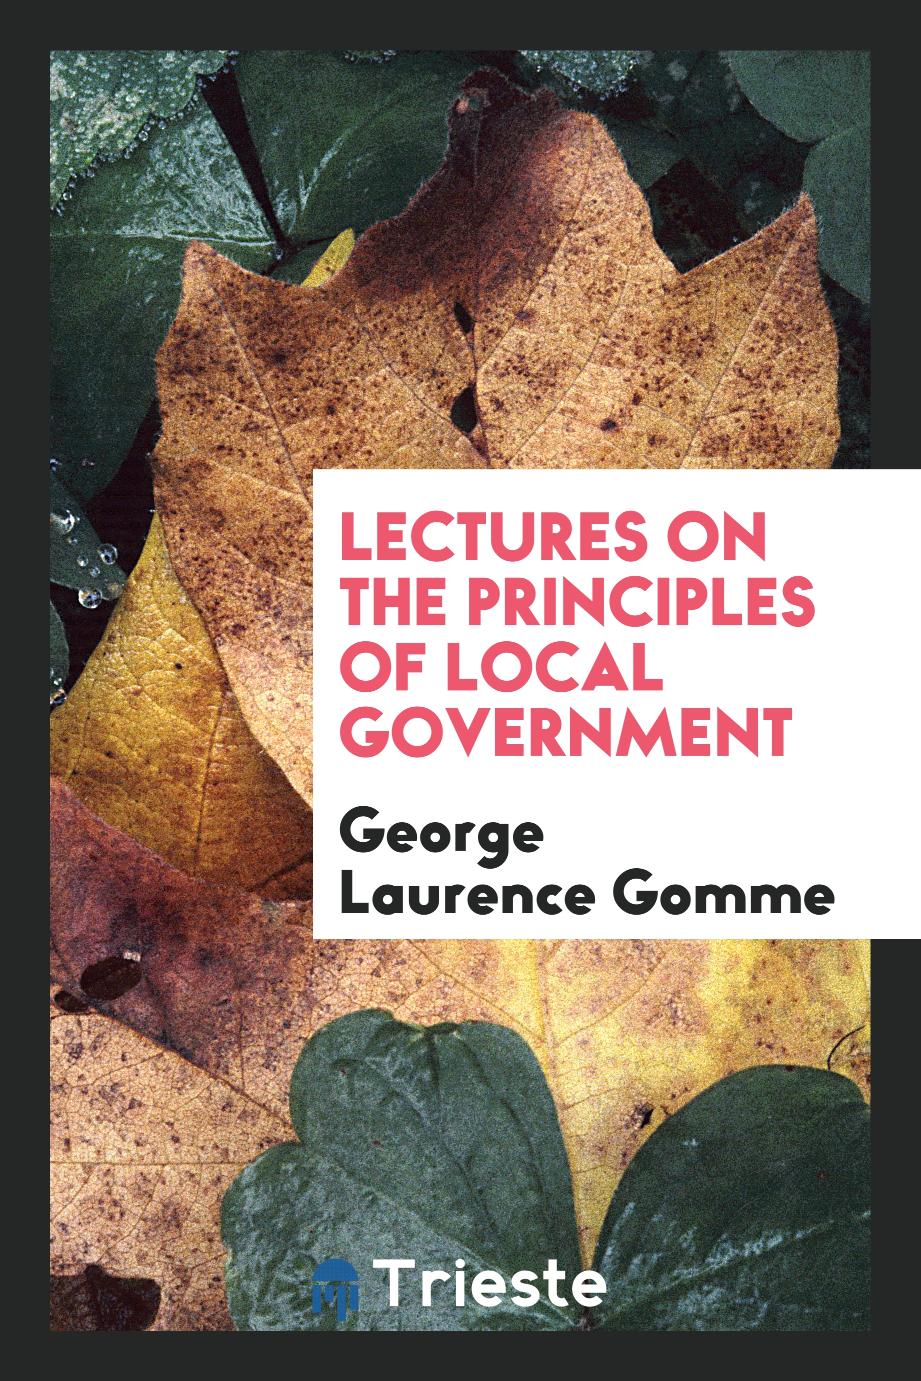 Lectures on the principles of local government